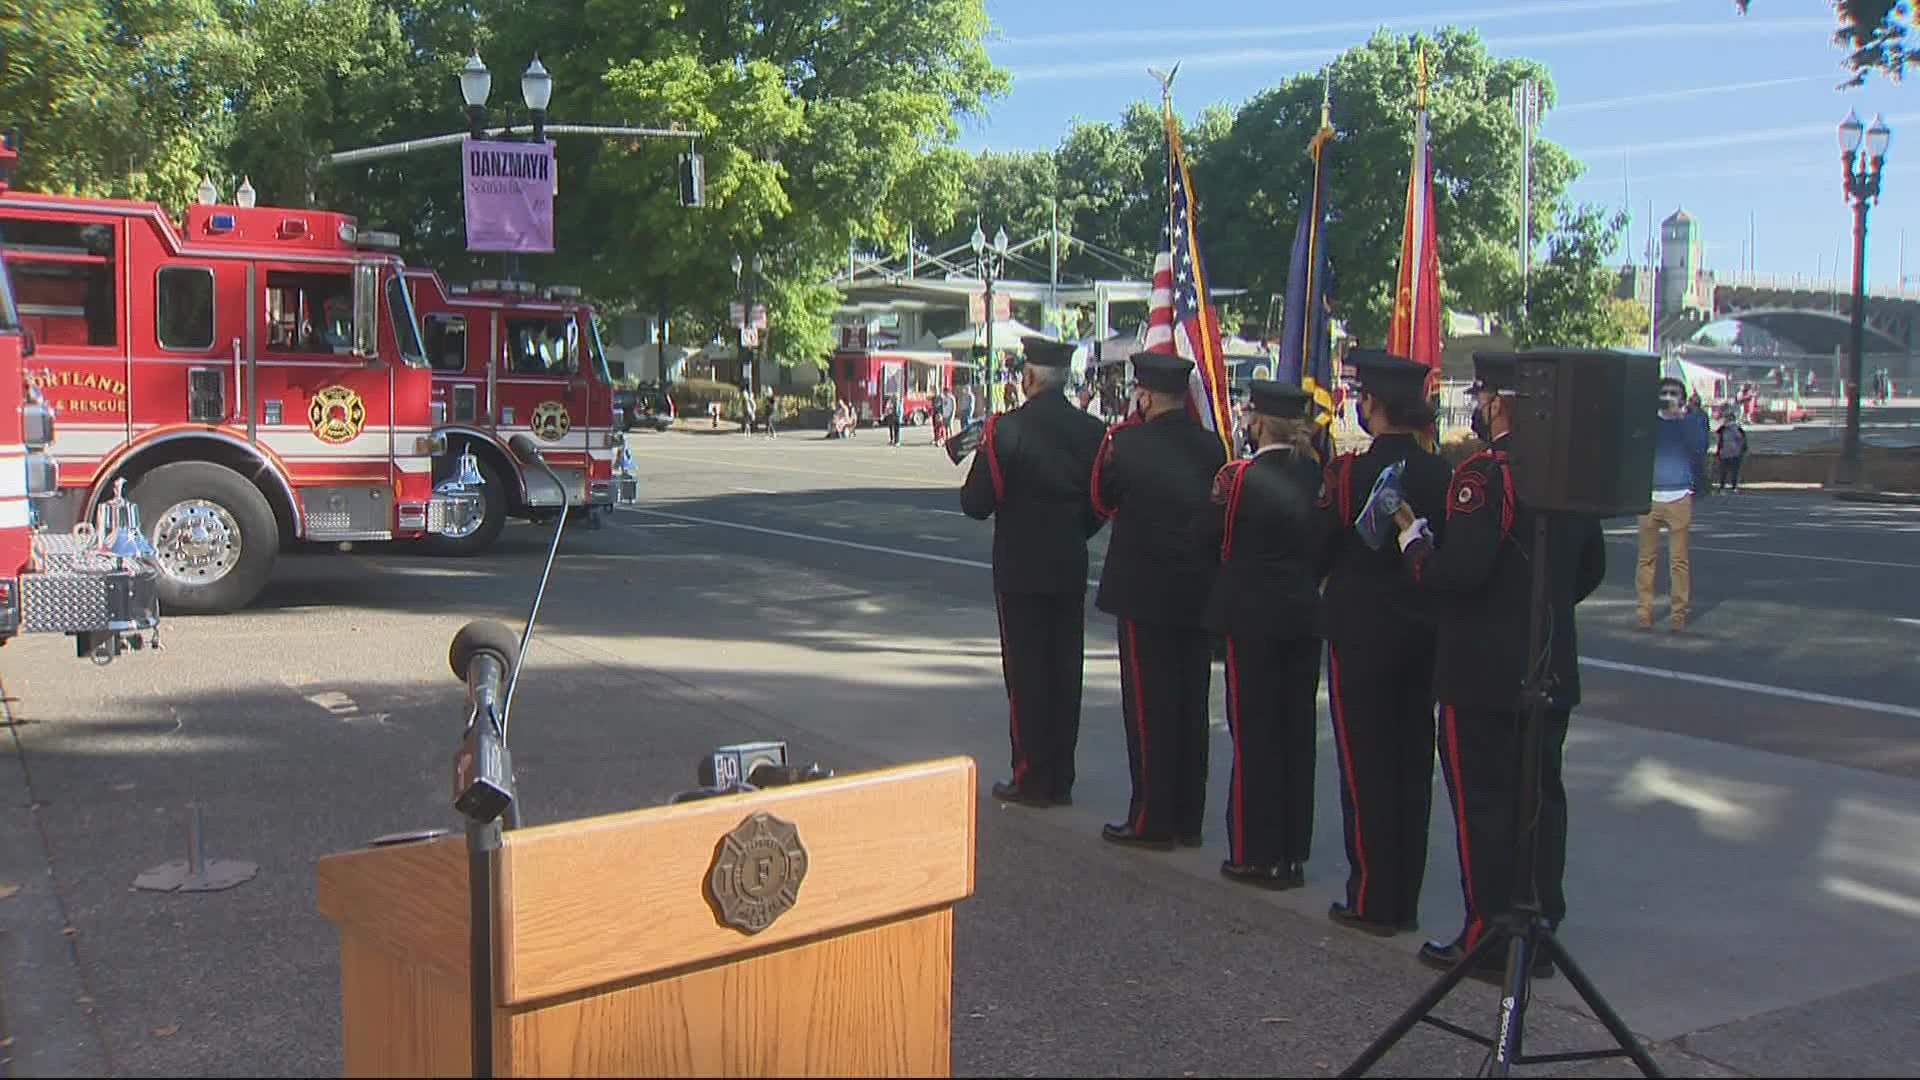 Portland firefighters, some of whom responded to New York after the attacks on Sept. 11, 2001, held a remembrance ceremony Saturday.